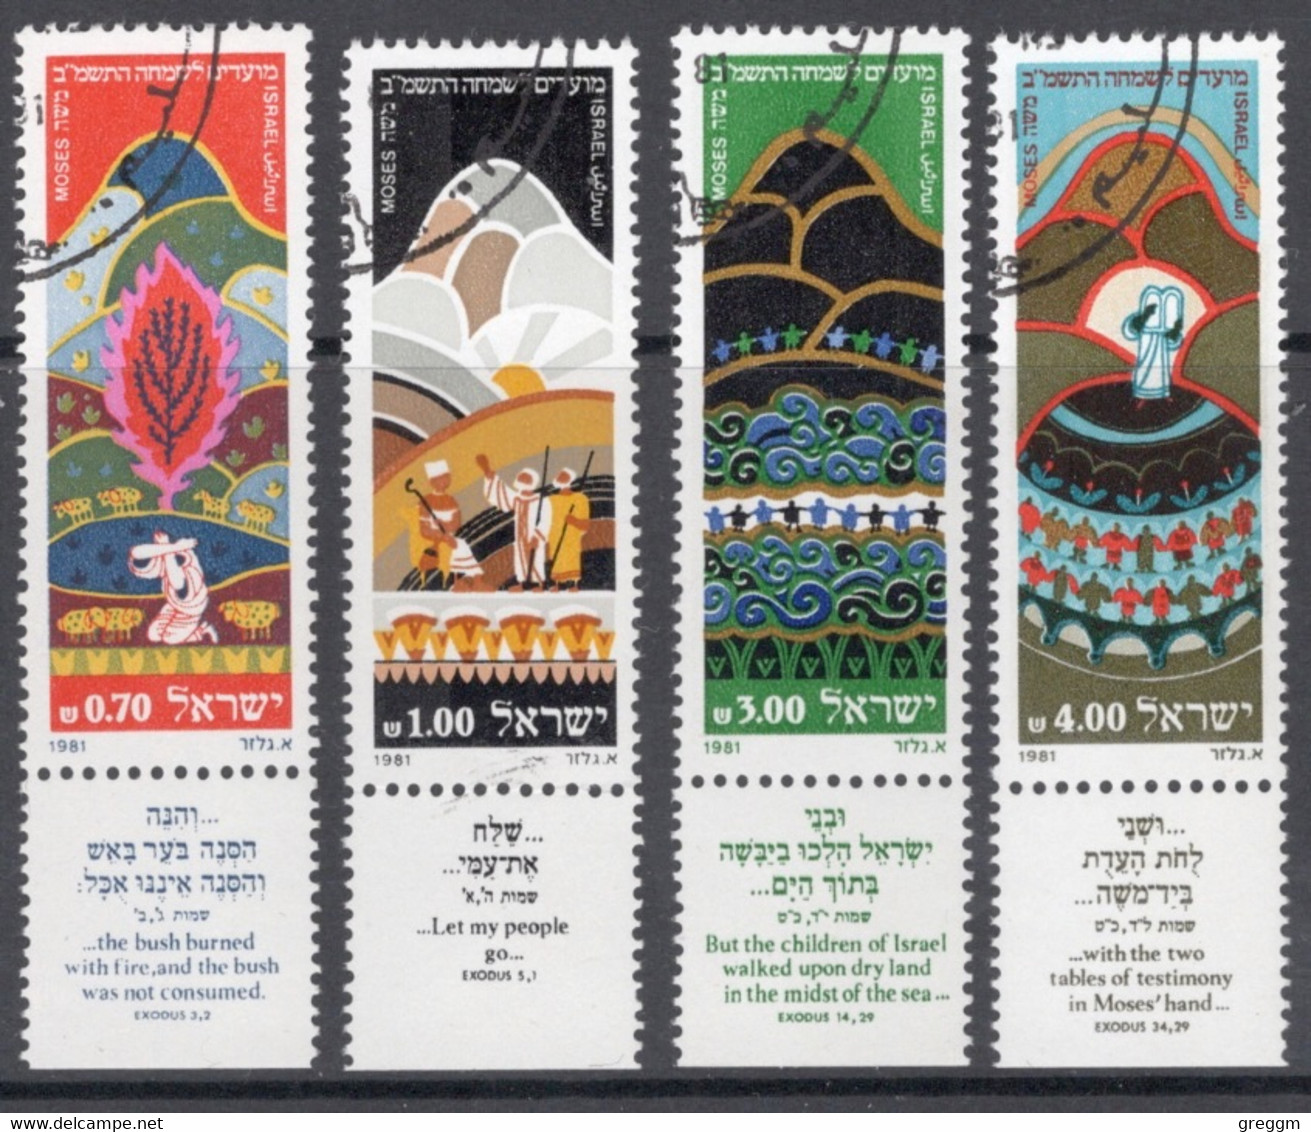 Israel 1981 Set Of Stamps Celebrating New Year In Fine Used With Tabs - Usados (con Tab)